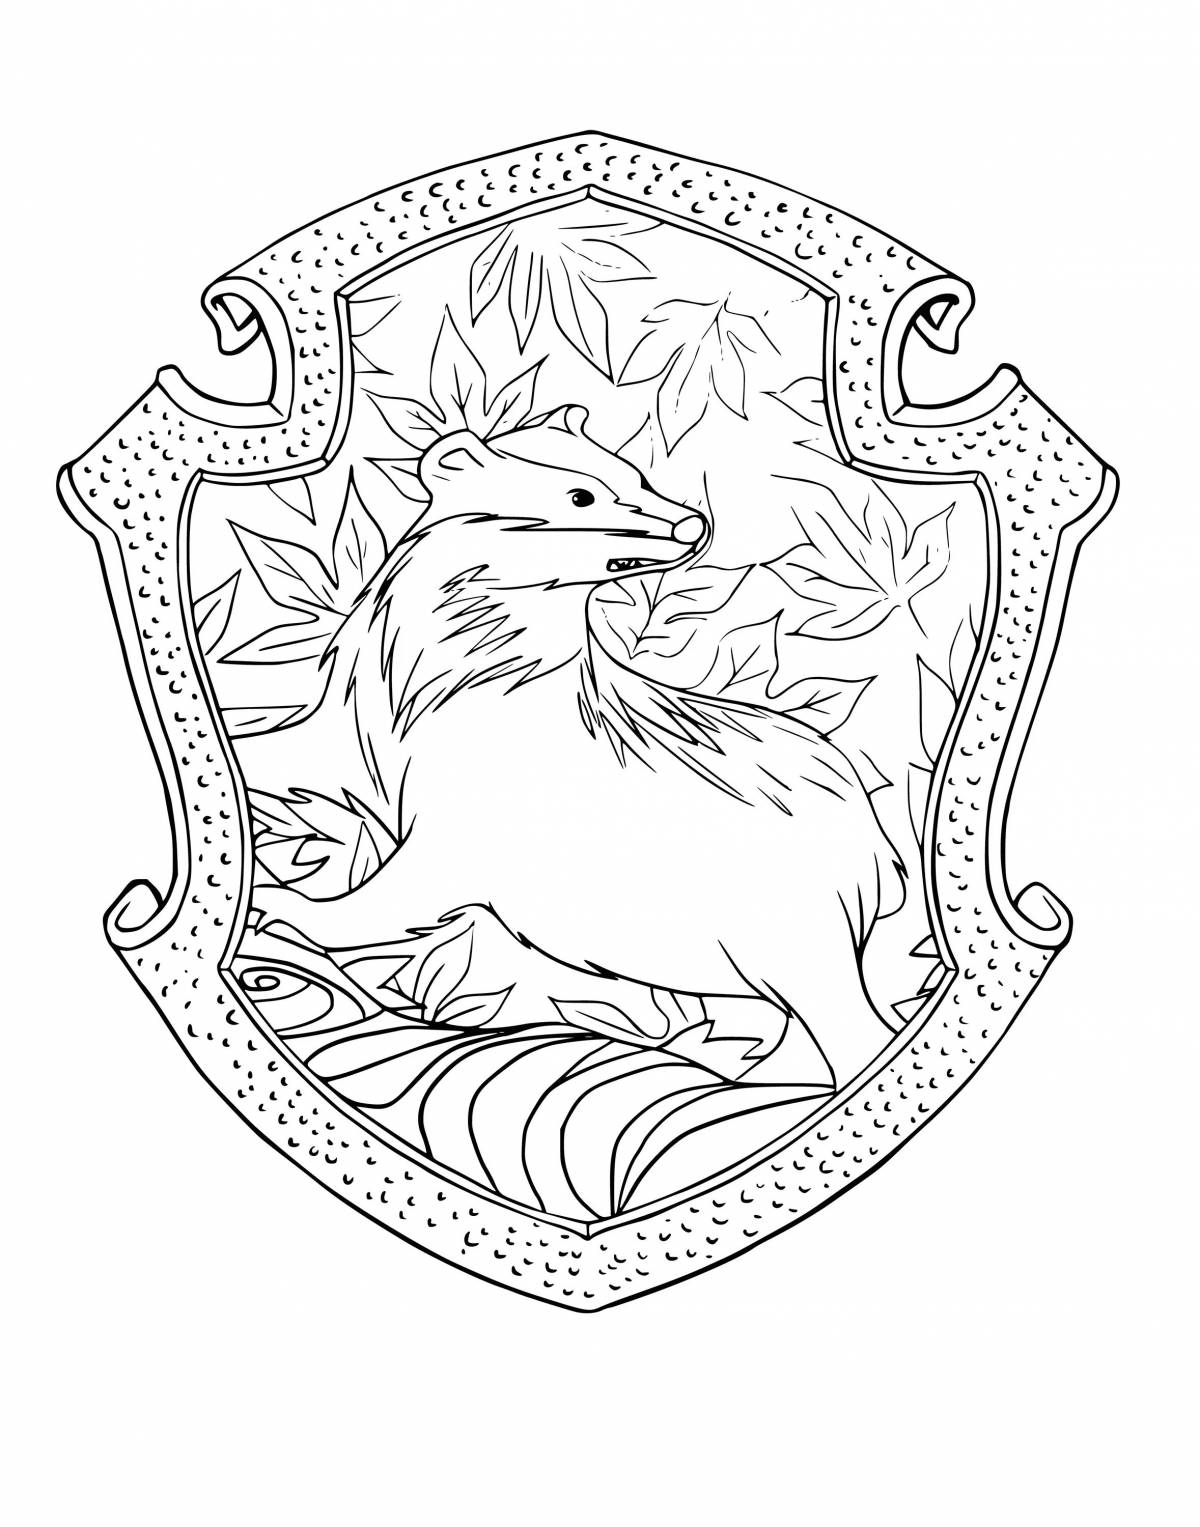 Playful slytherin coloring page